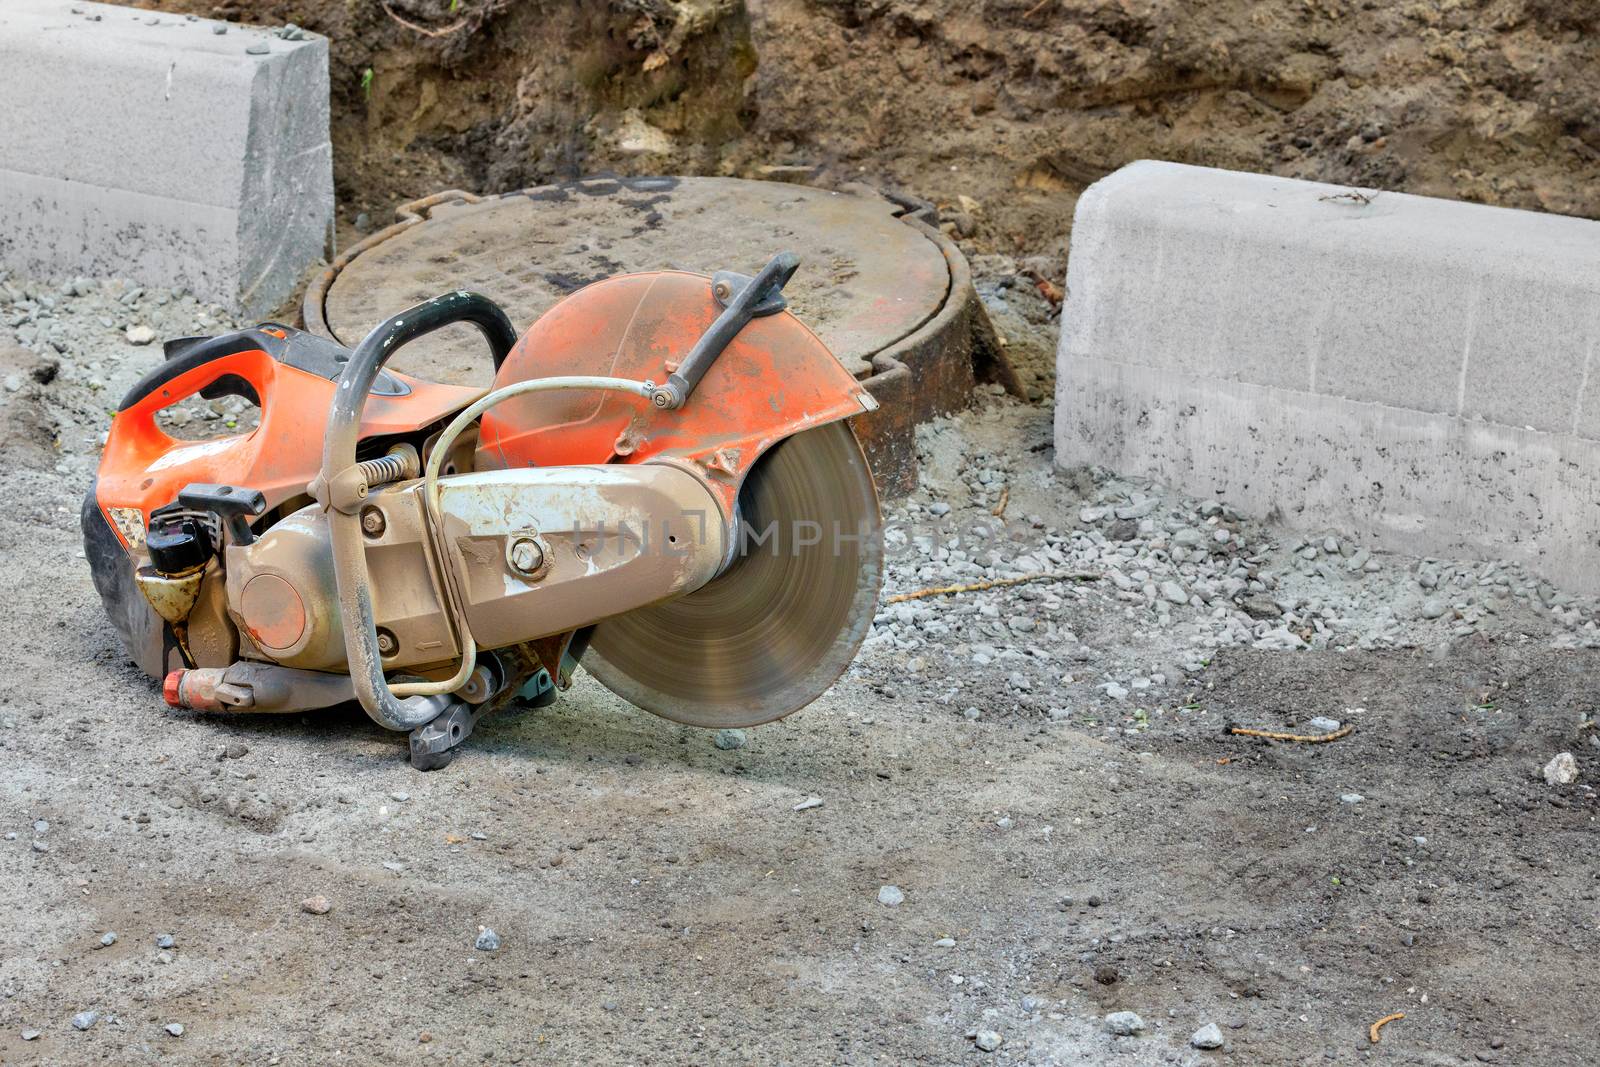 Concrete cutter at a construction site with a running engine and a diamond blade for cutting concrete, copy space.